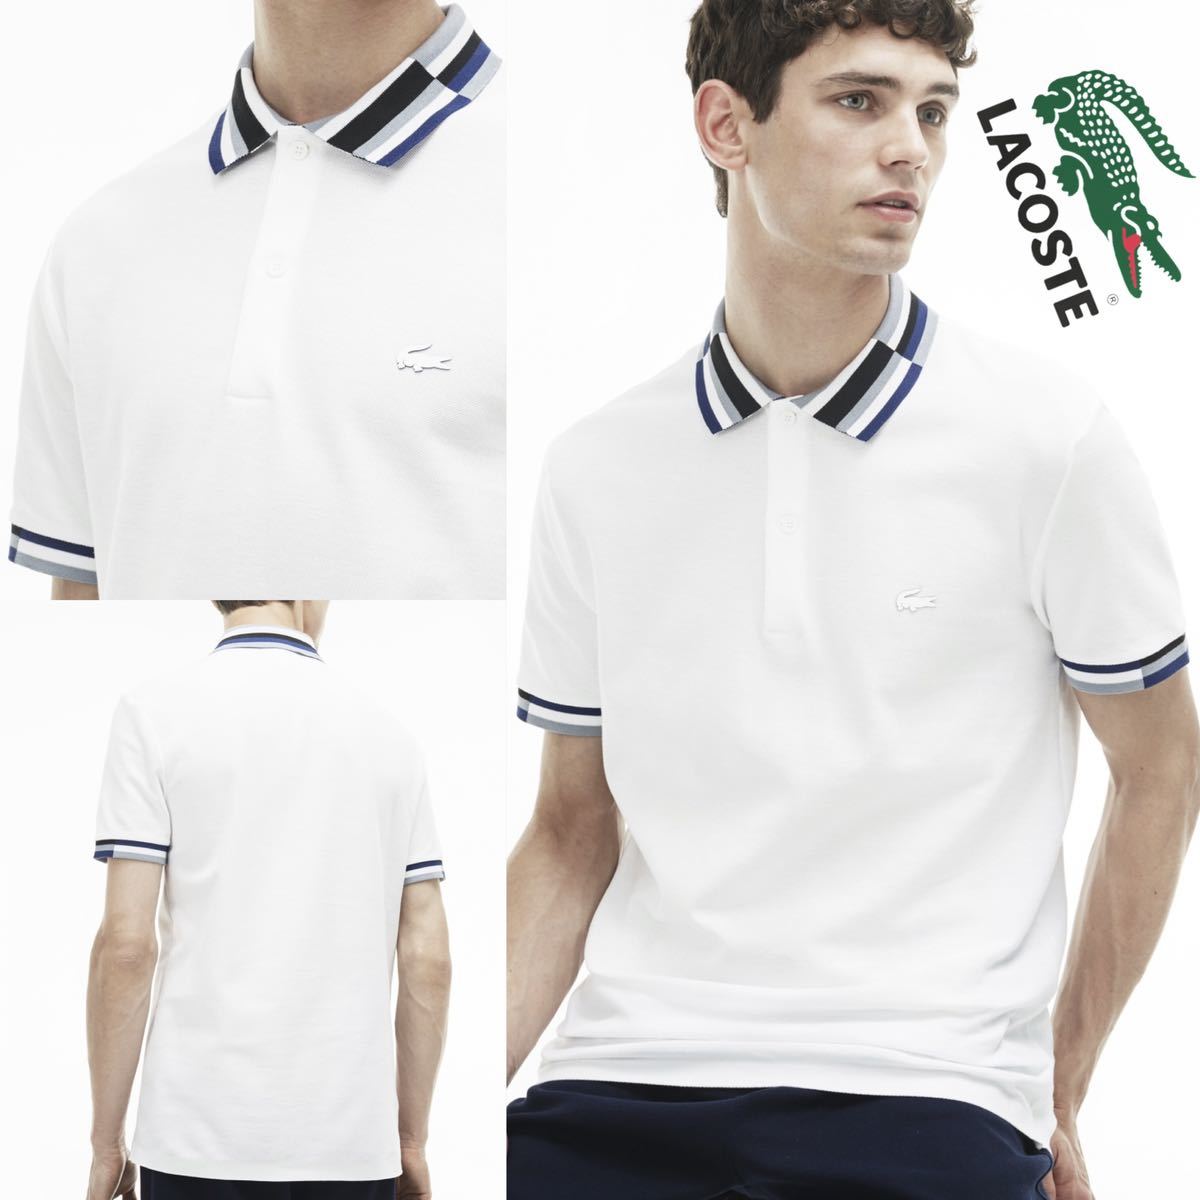 LACOSTE ラコステ カラーブロック ポロシャツ モザイク 限定 レア 希少